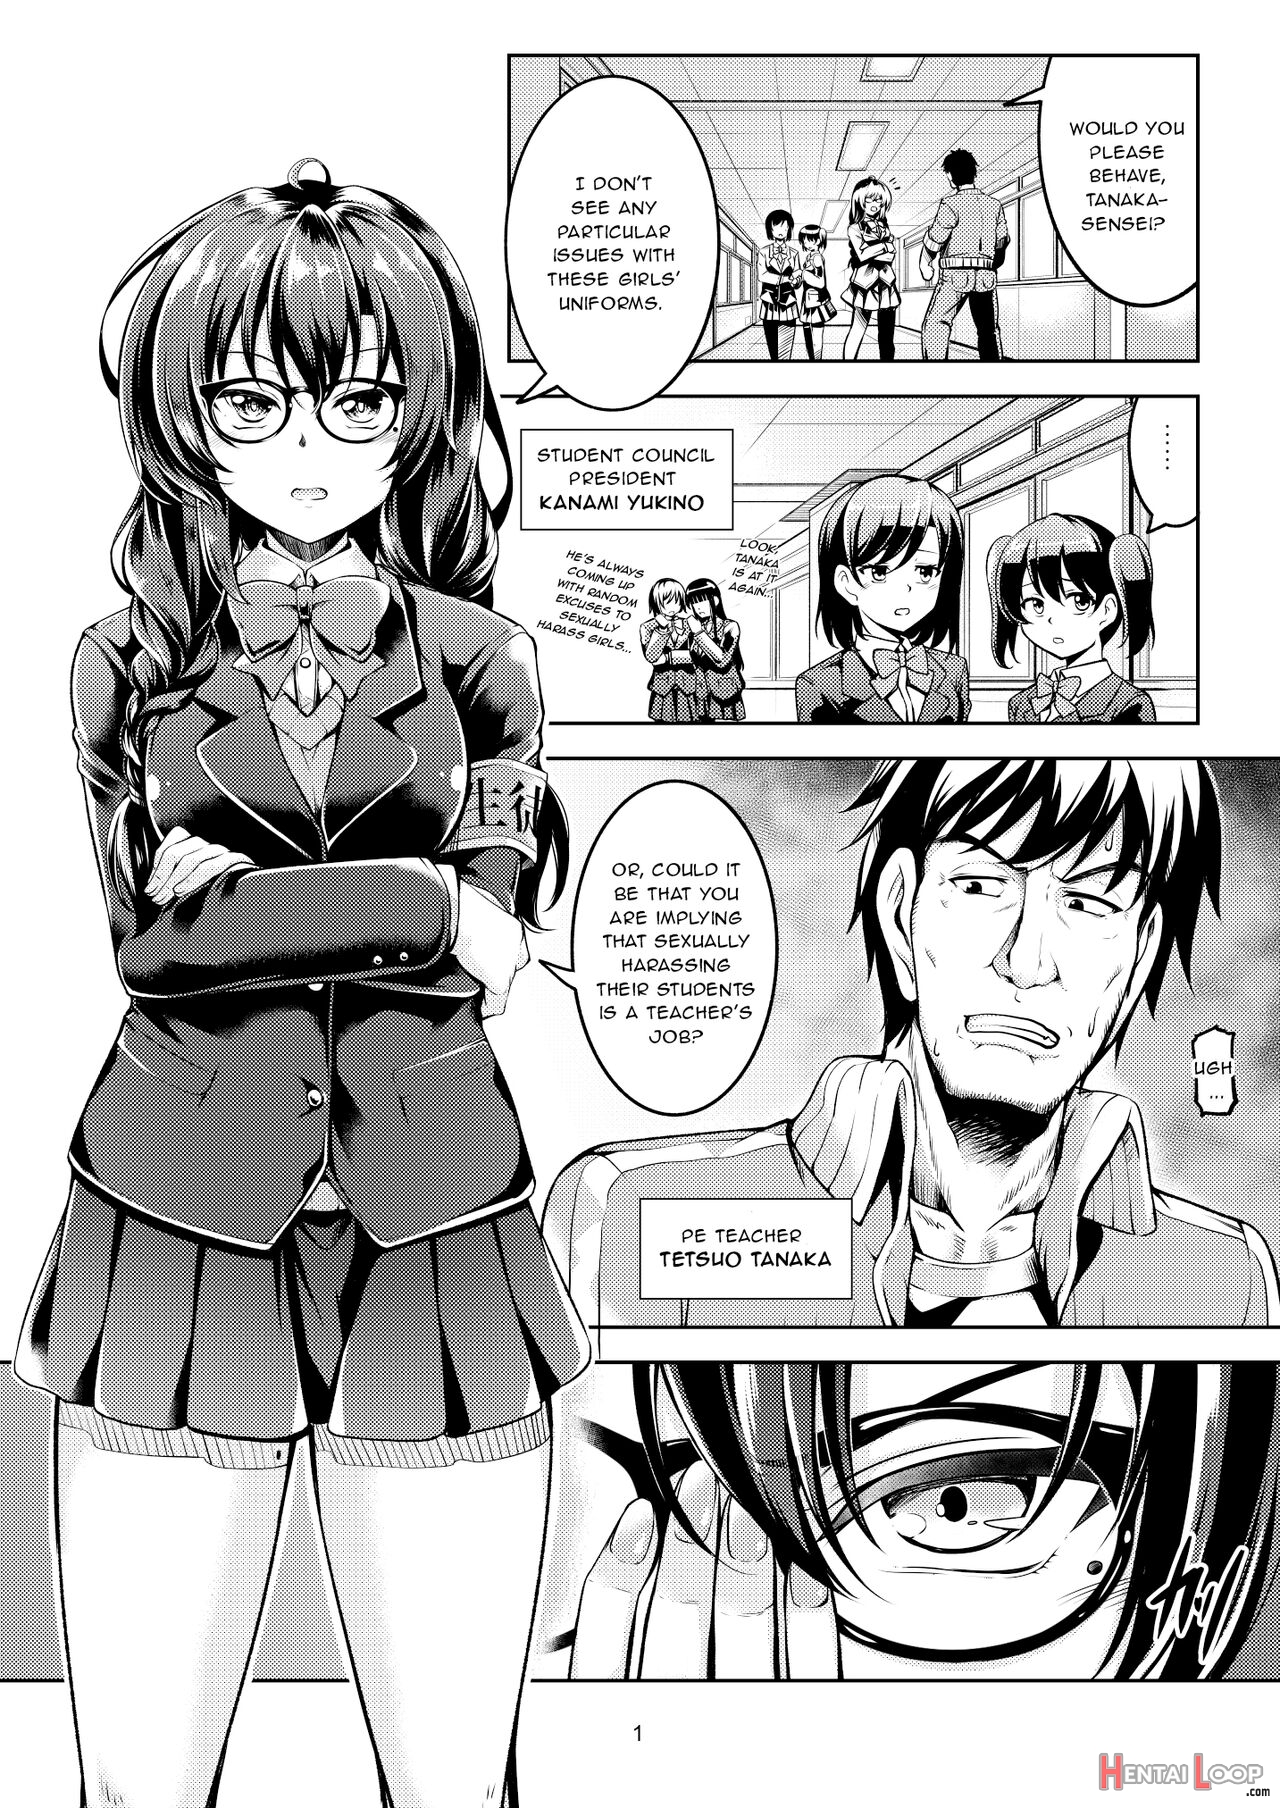 Darkside Streamer Take 1 Blackmail! The Fall Of The Anal Maniac Student Council President -yukino Kanami- page 5